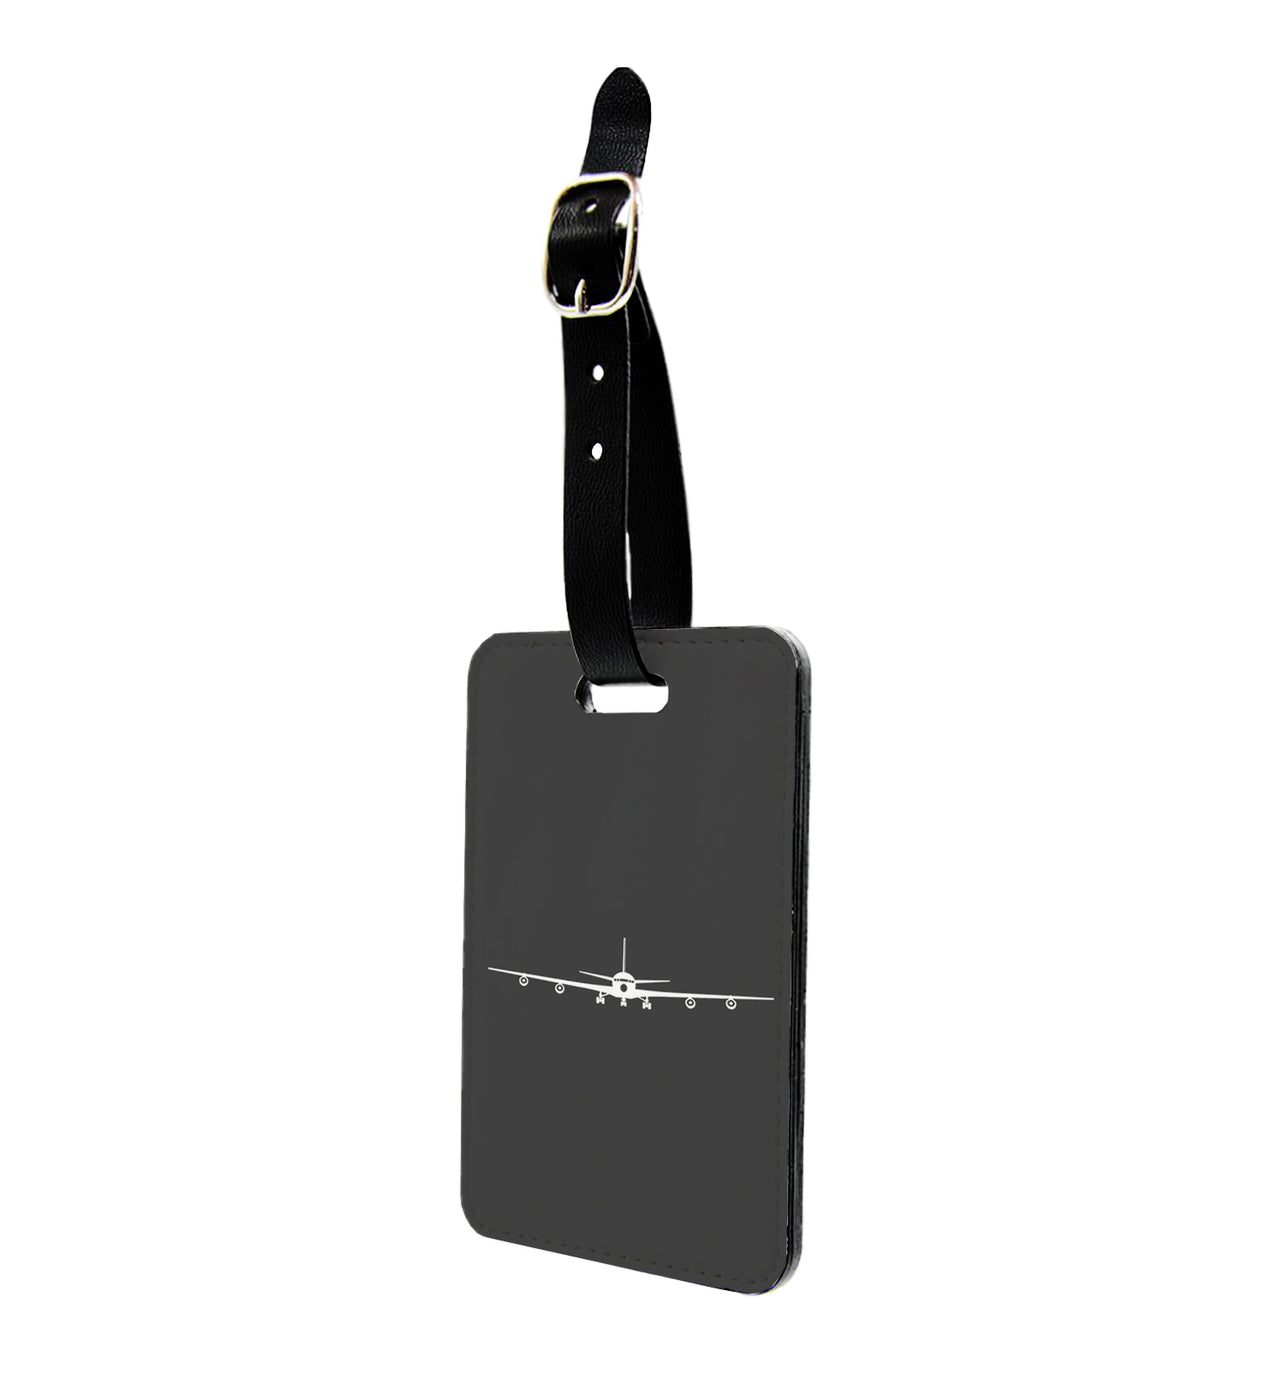 Boeing 707 Silhouette Designed Luggage Tag